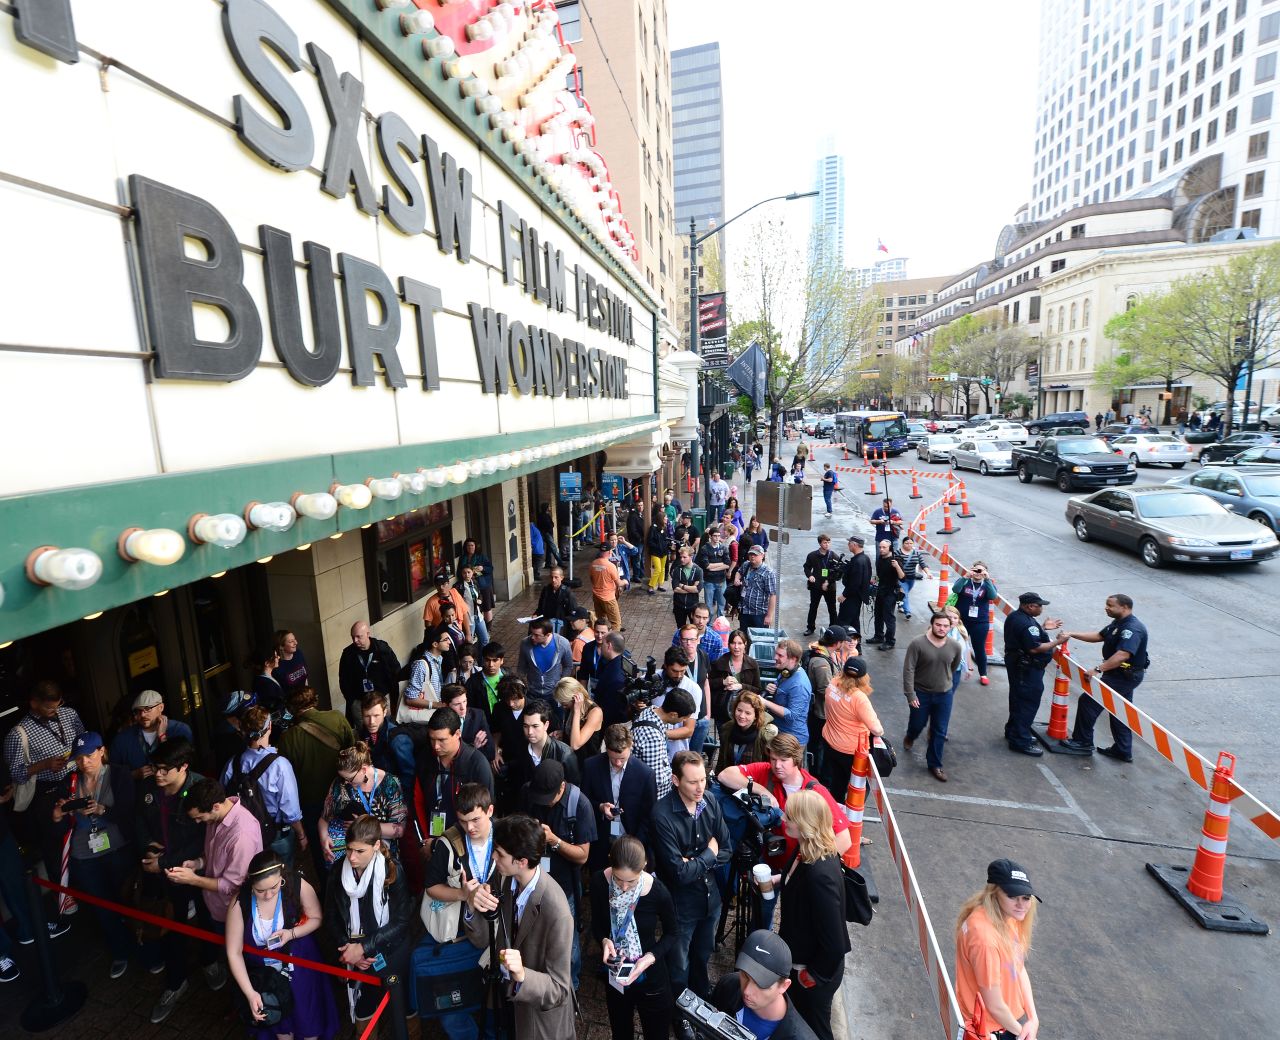 Fans line up for a screening of "The Incredible Burt Wonderstone" on Friday, March 8.